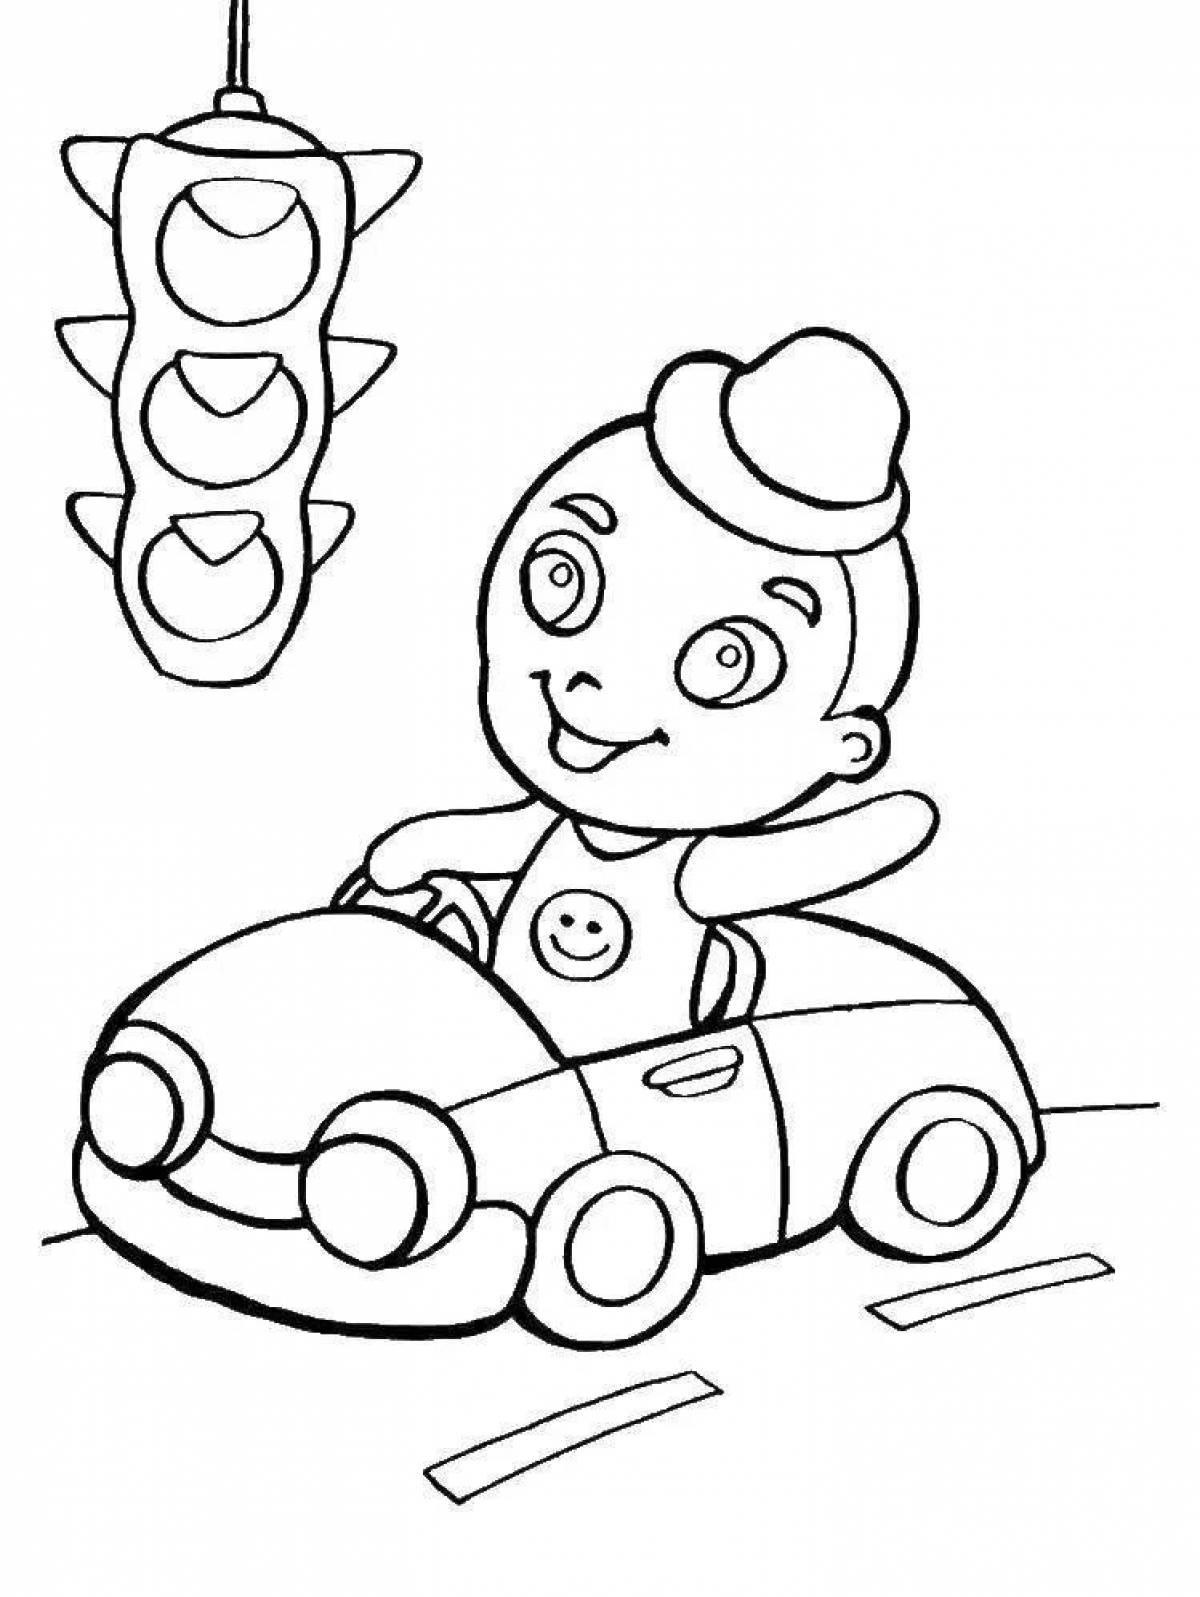 Happy traffic light coloring page